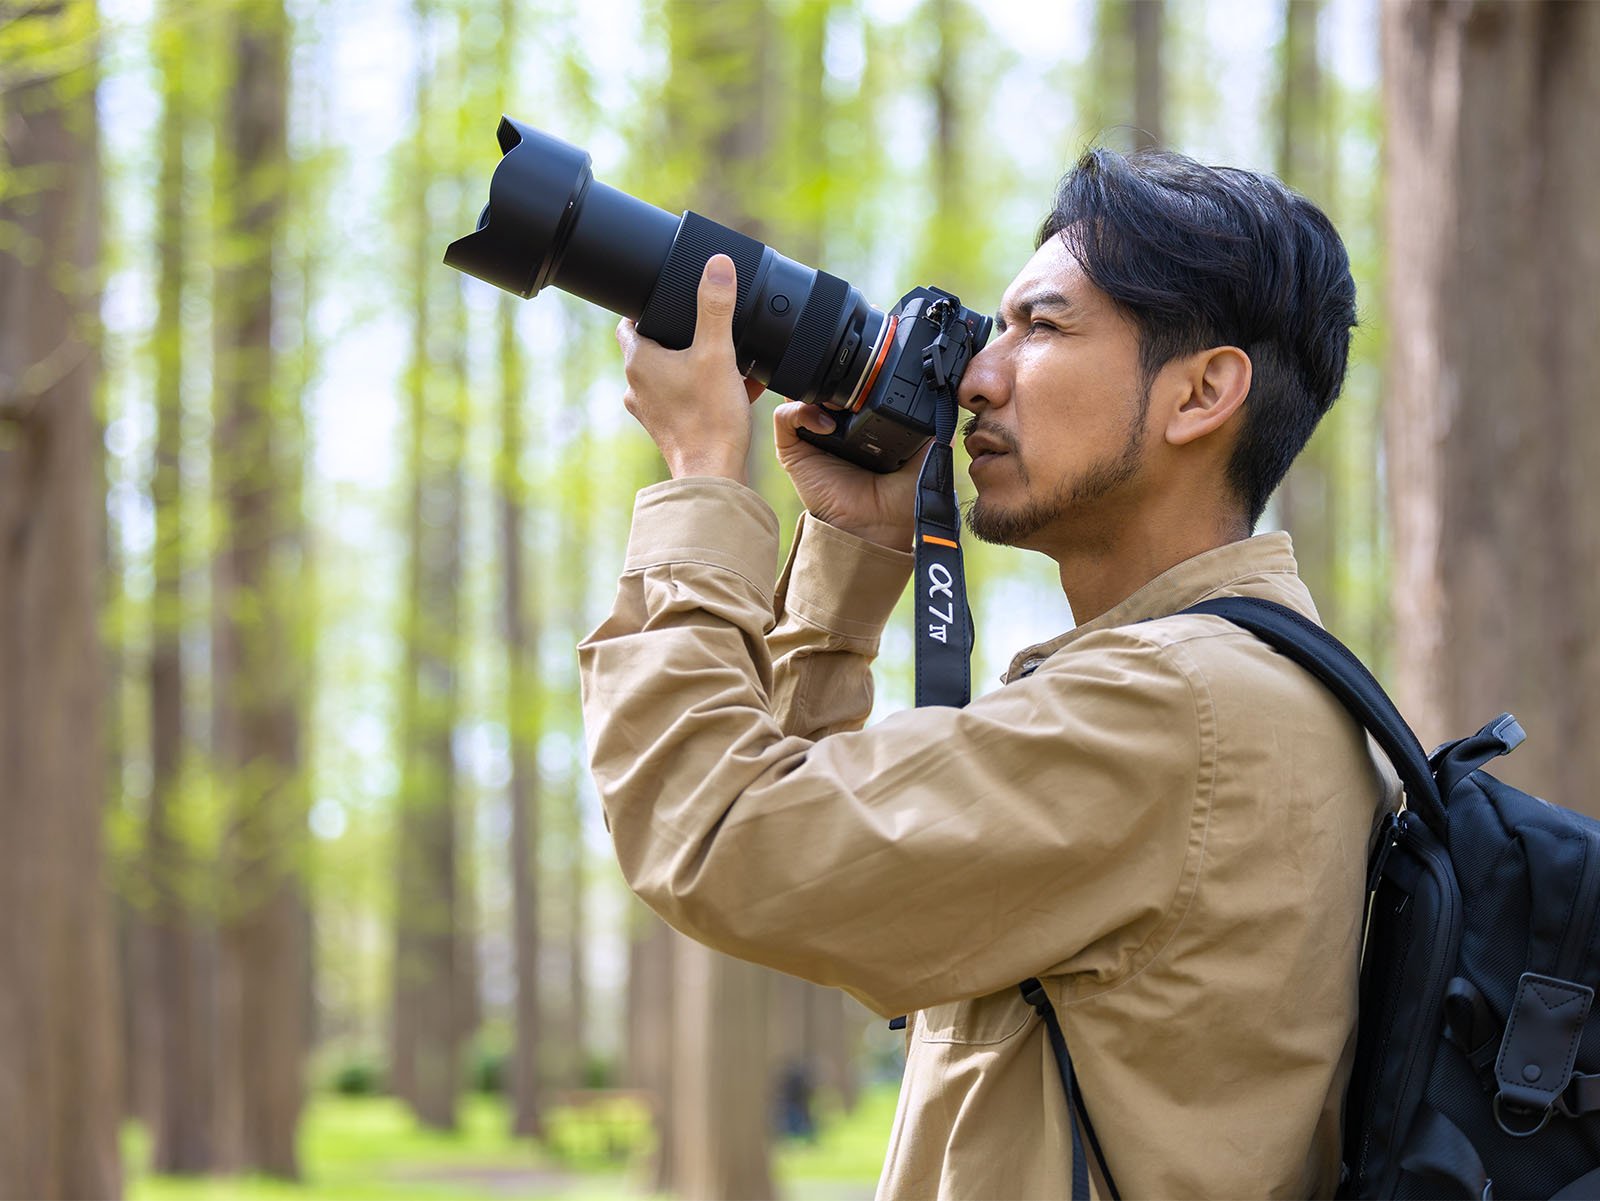 A man wearing a tan jacket holds a large camera with a telephoto lens up to his eye while photographing a forest with tall, leafless trees. He has a black backpack over one shoulder and appears focused on capturing the scene.